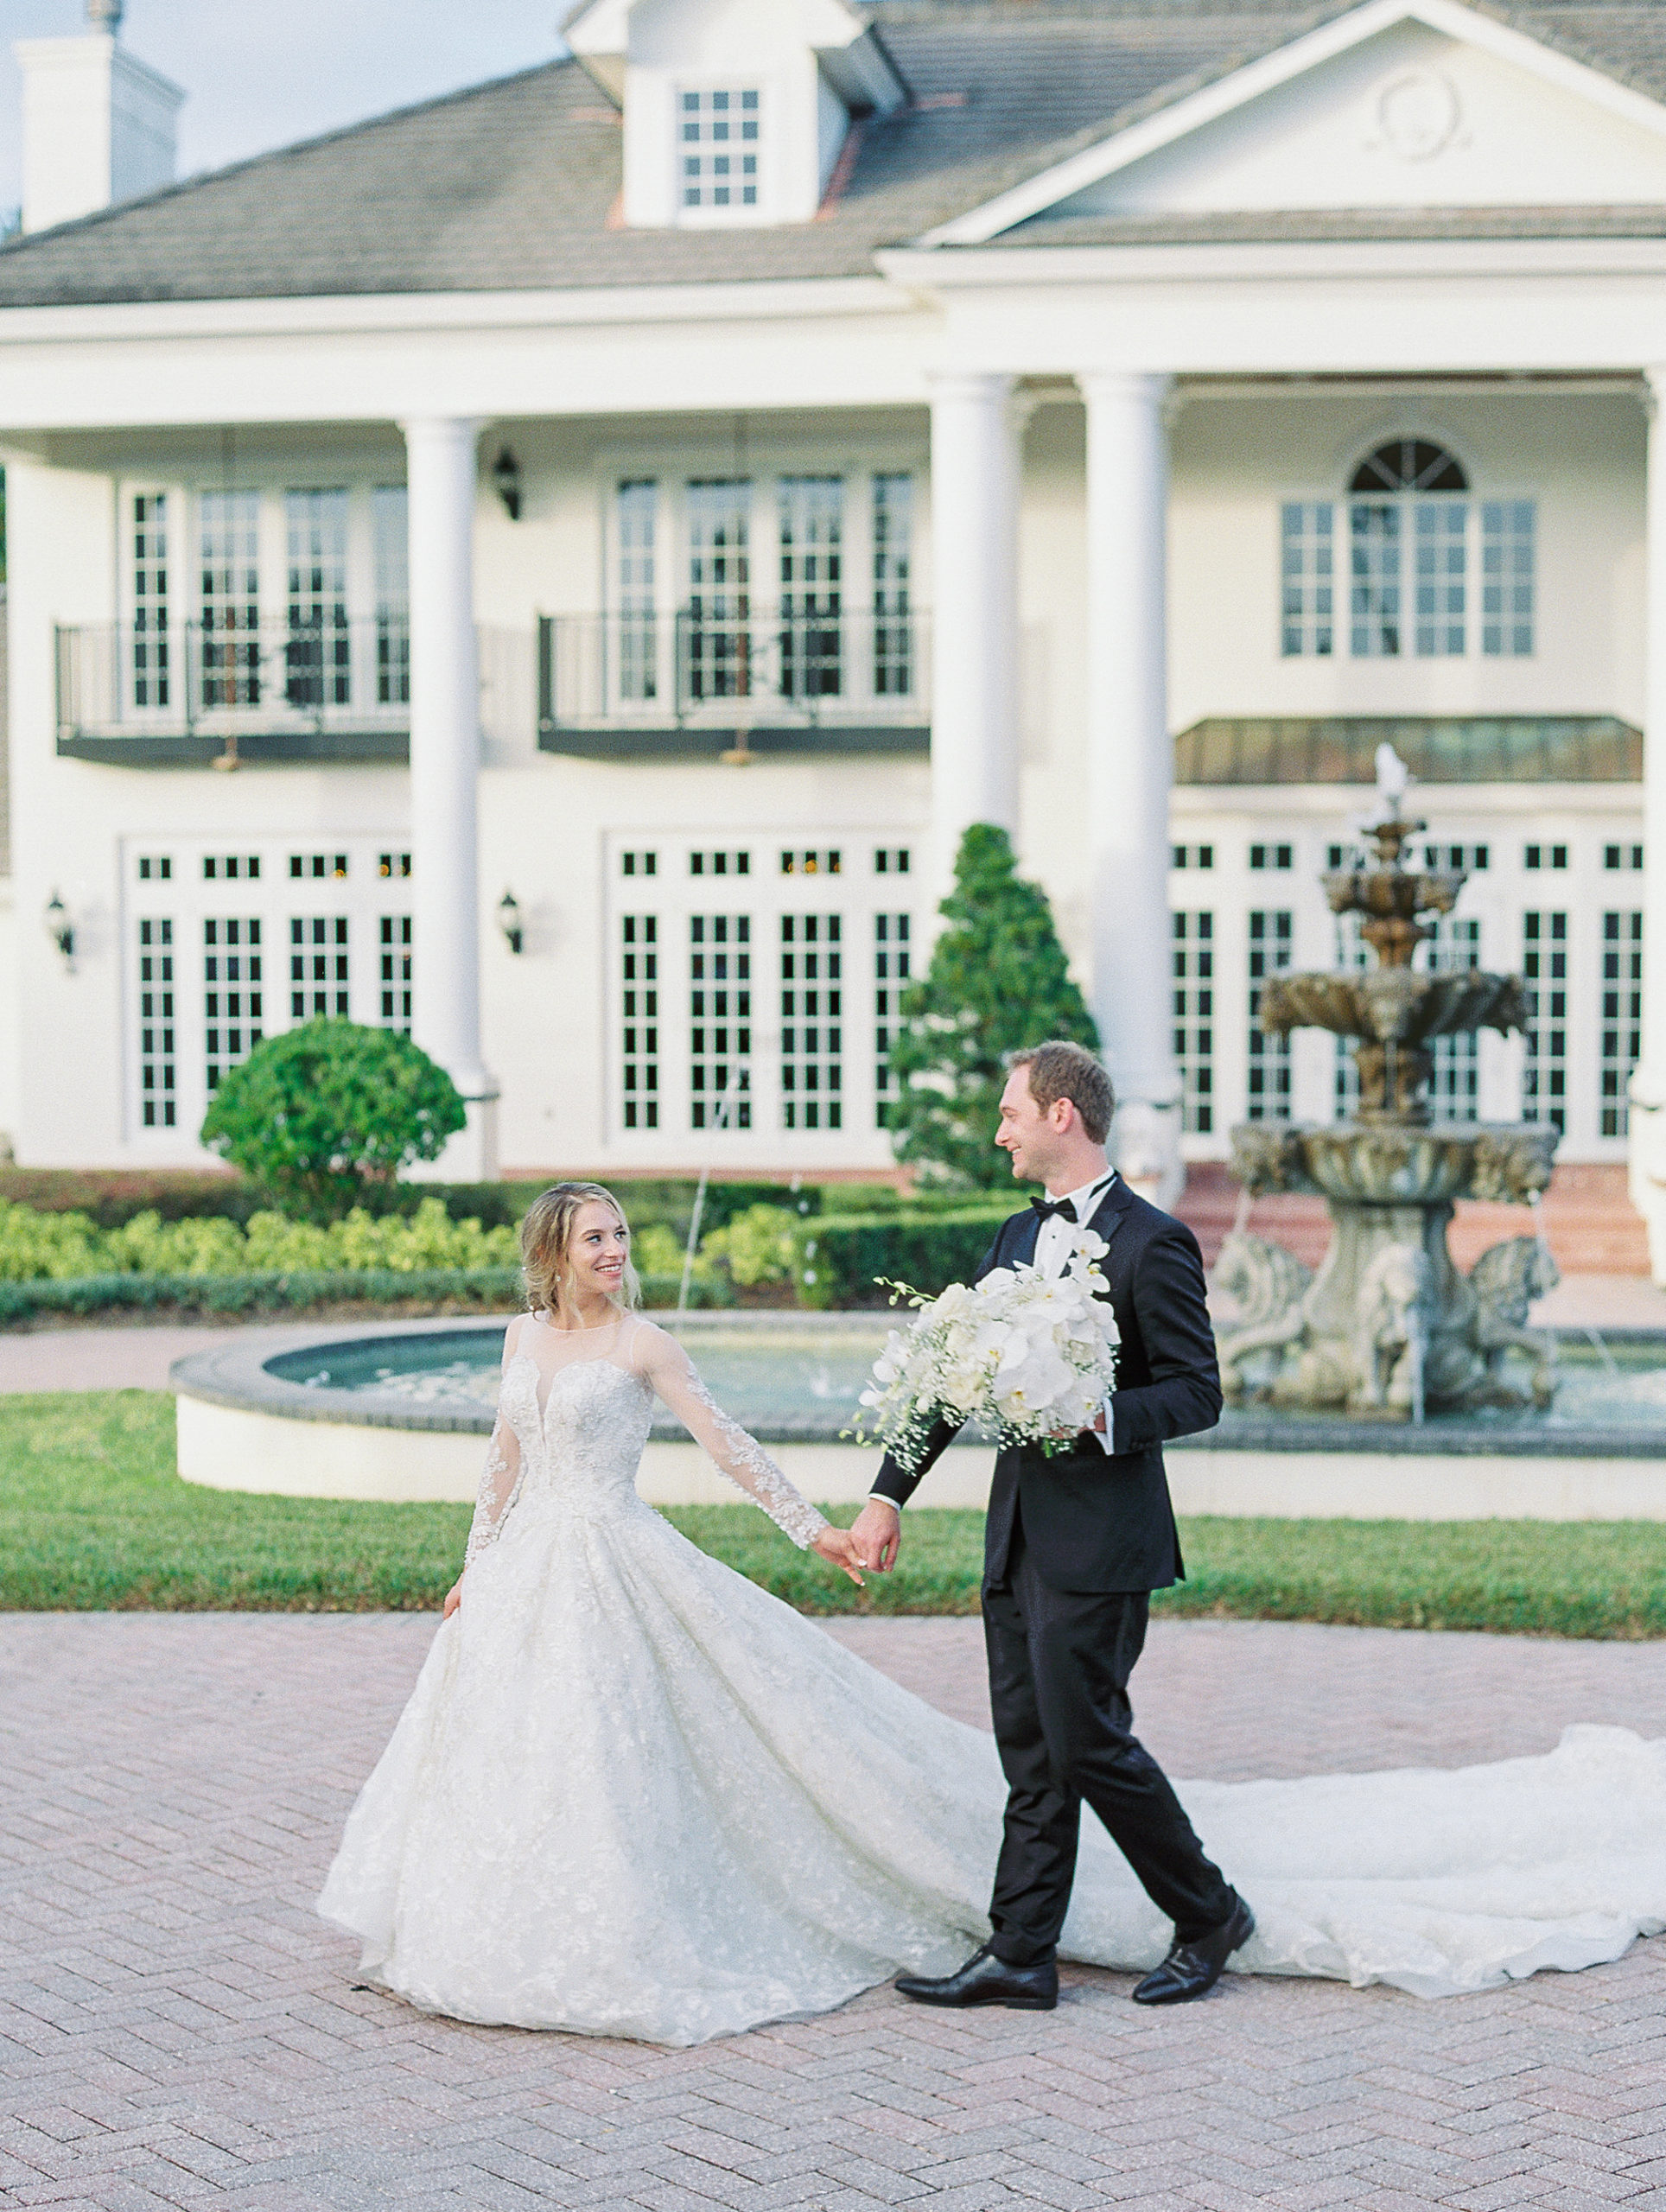 Bride leads groom across brick driveway in front of large estate and fountain for Luxmore Grande Wedding